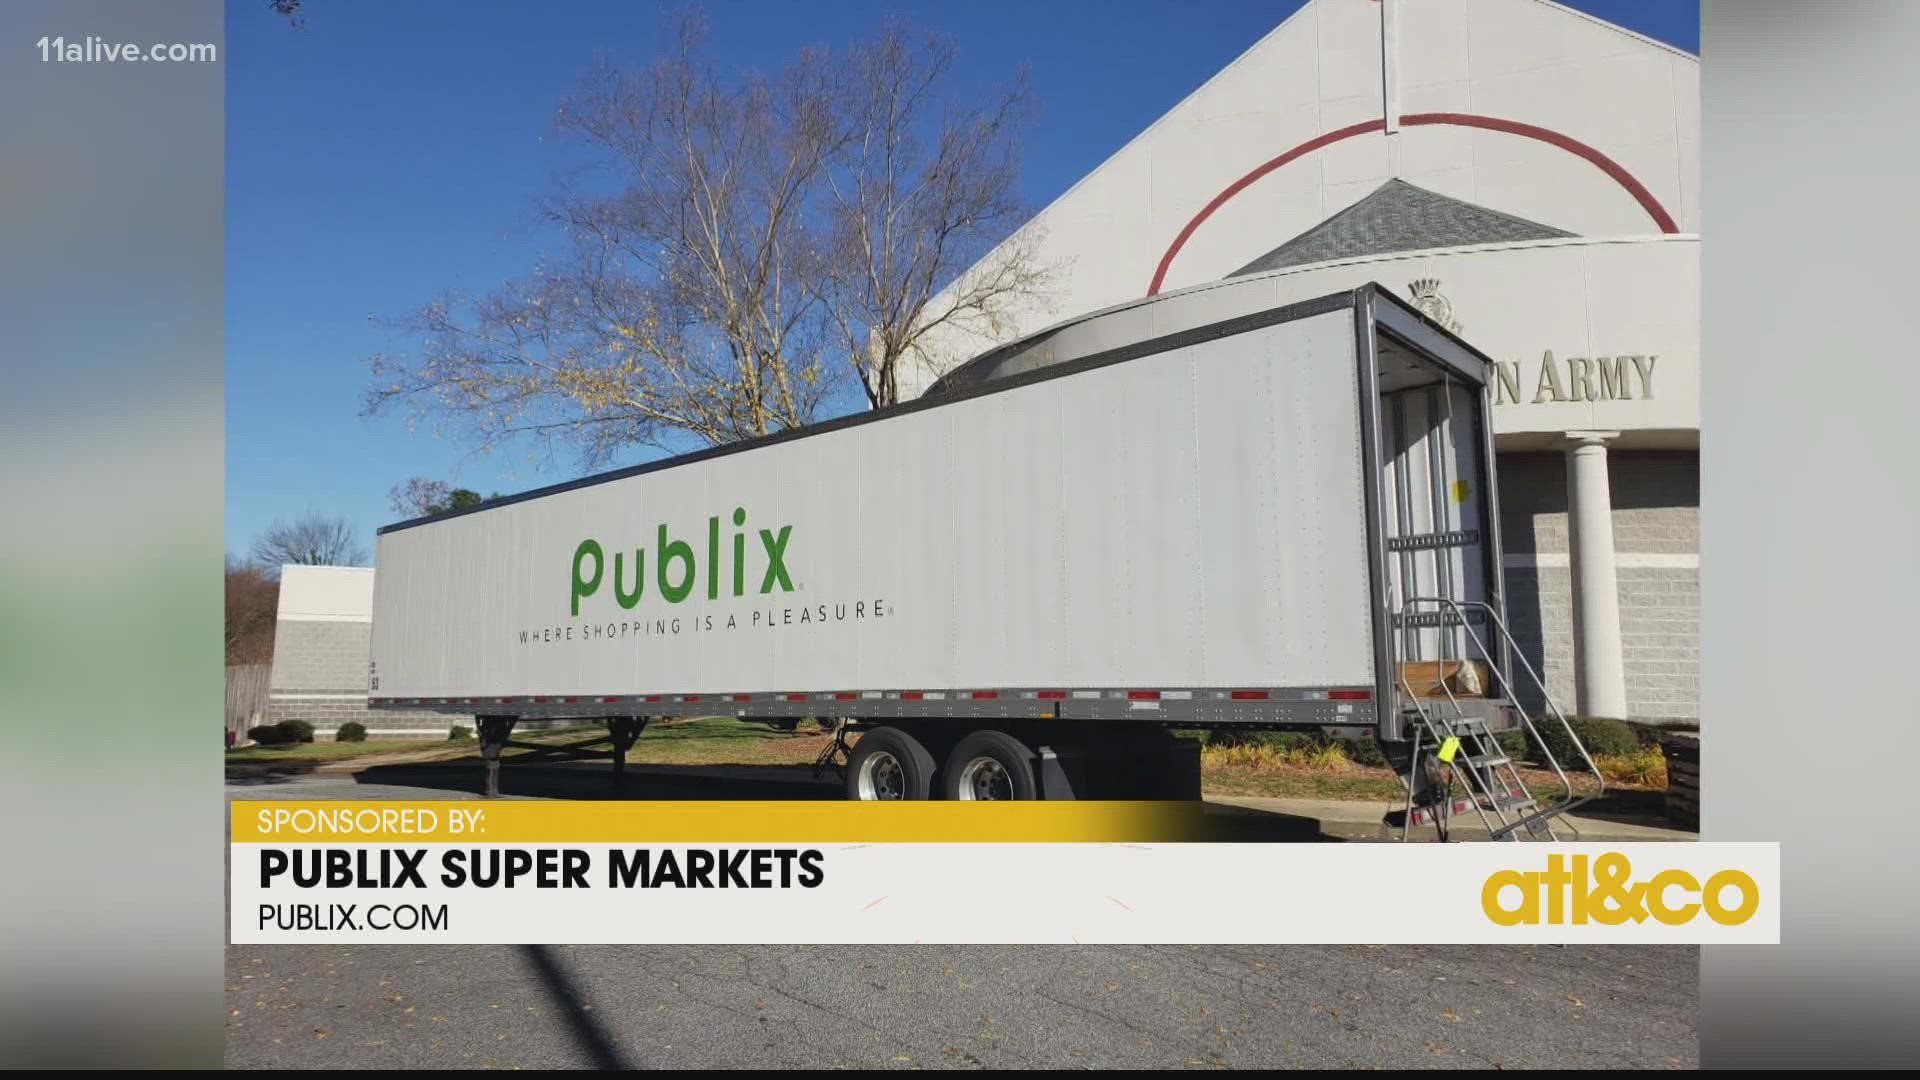 Where shopping is a pleasure! See how Publix gives back to our community.